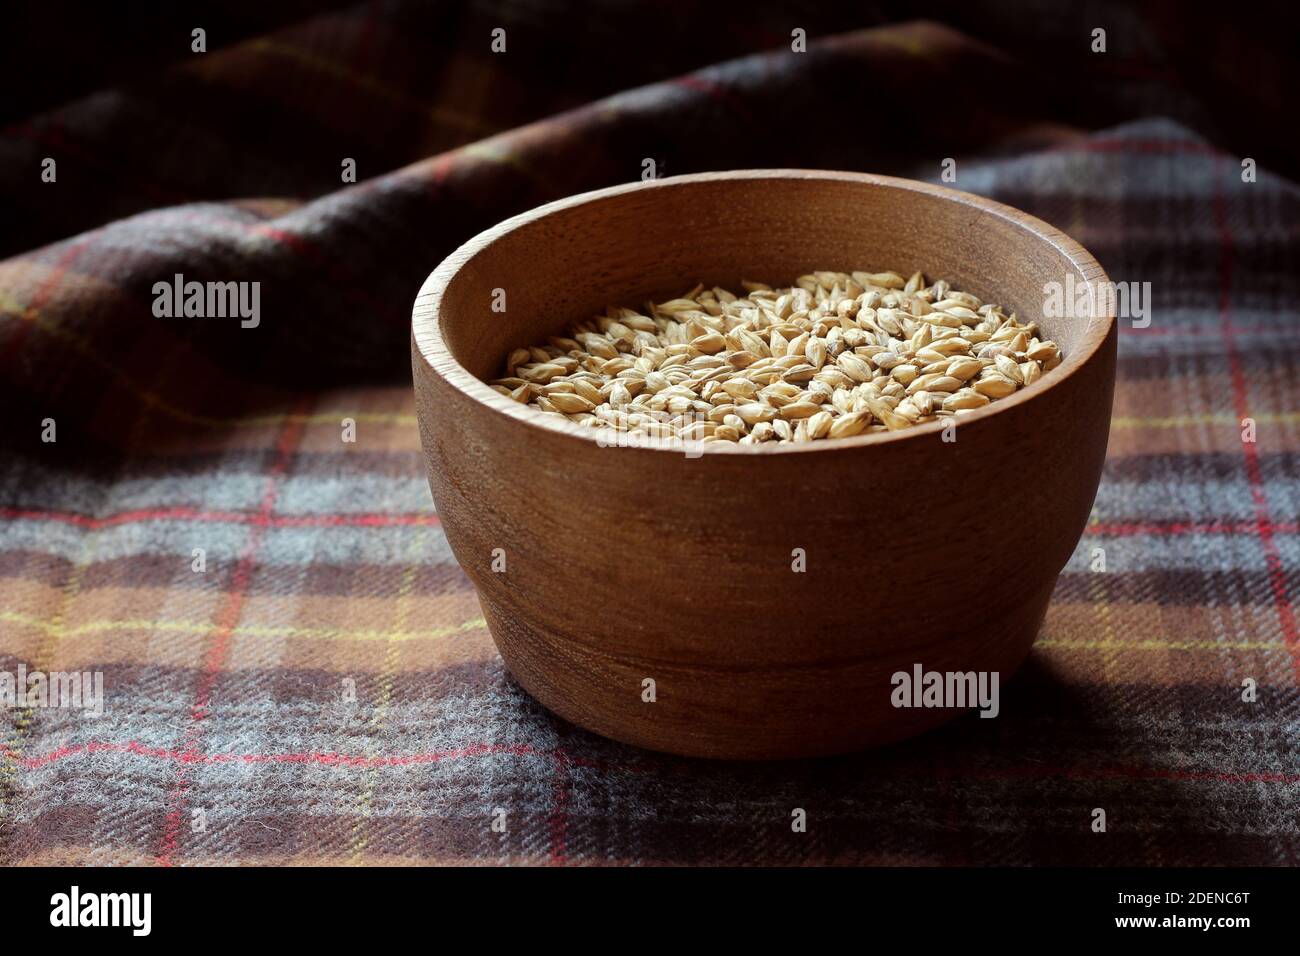 Side on view of a wooden bowl full of malted barley grains, on a tartan table cloth. One of the main ingredients in beer brewing and scotch whisky mak Stock Photo